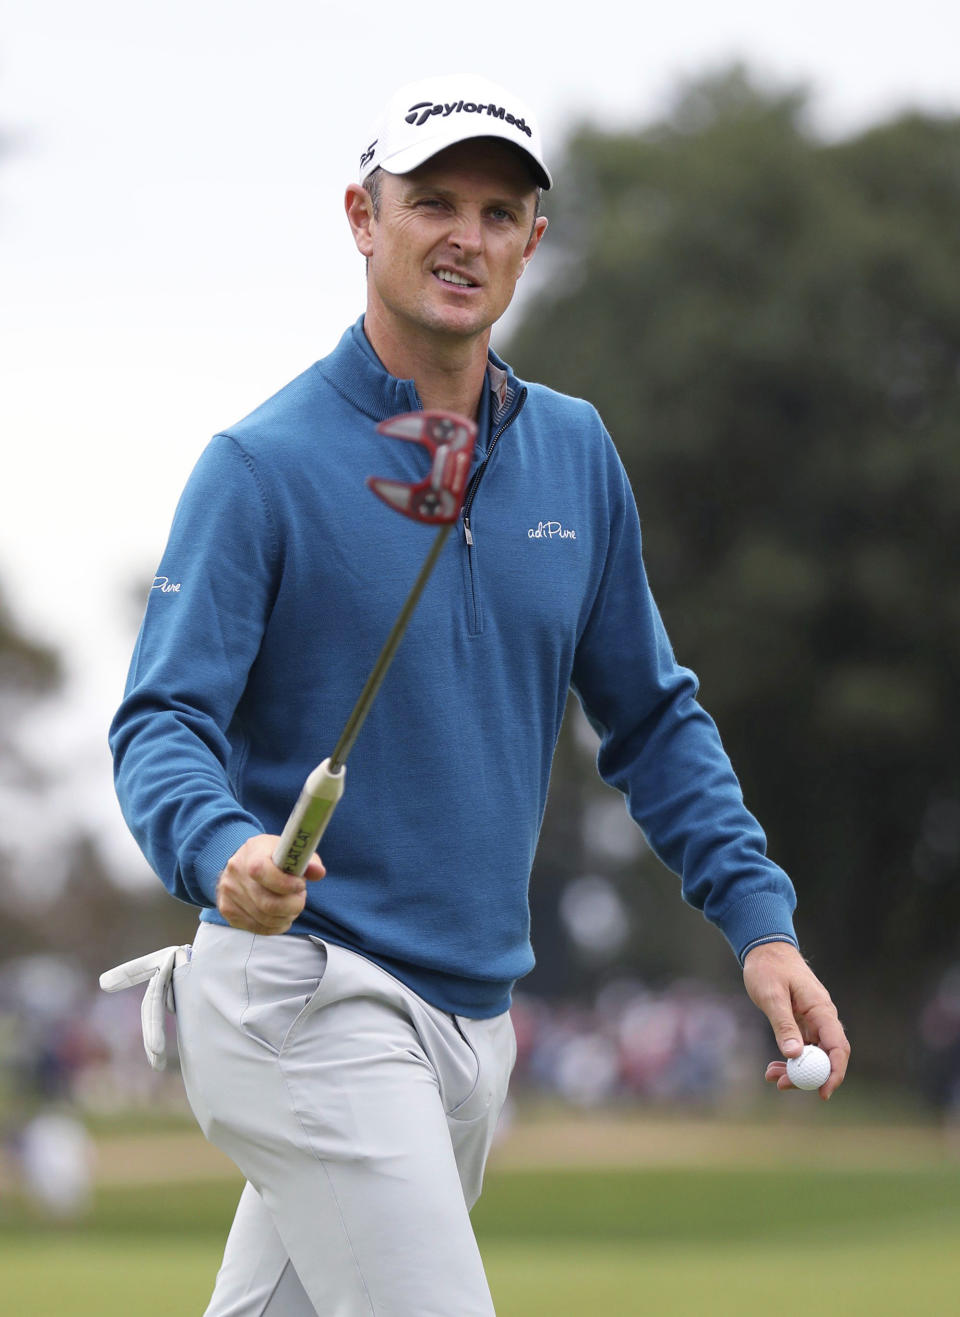 Justin Rose reacts after making a birdie putt on the fourth green during the third round of the BMW Championship golf tournament at Aronimink in Newtown Square, Pa., Saturday, Sept. 8, 2018. (Charles Fox/The Philadelphia Inquirer via AP)